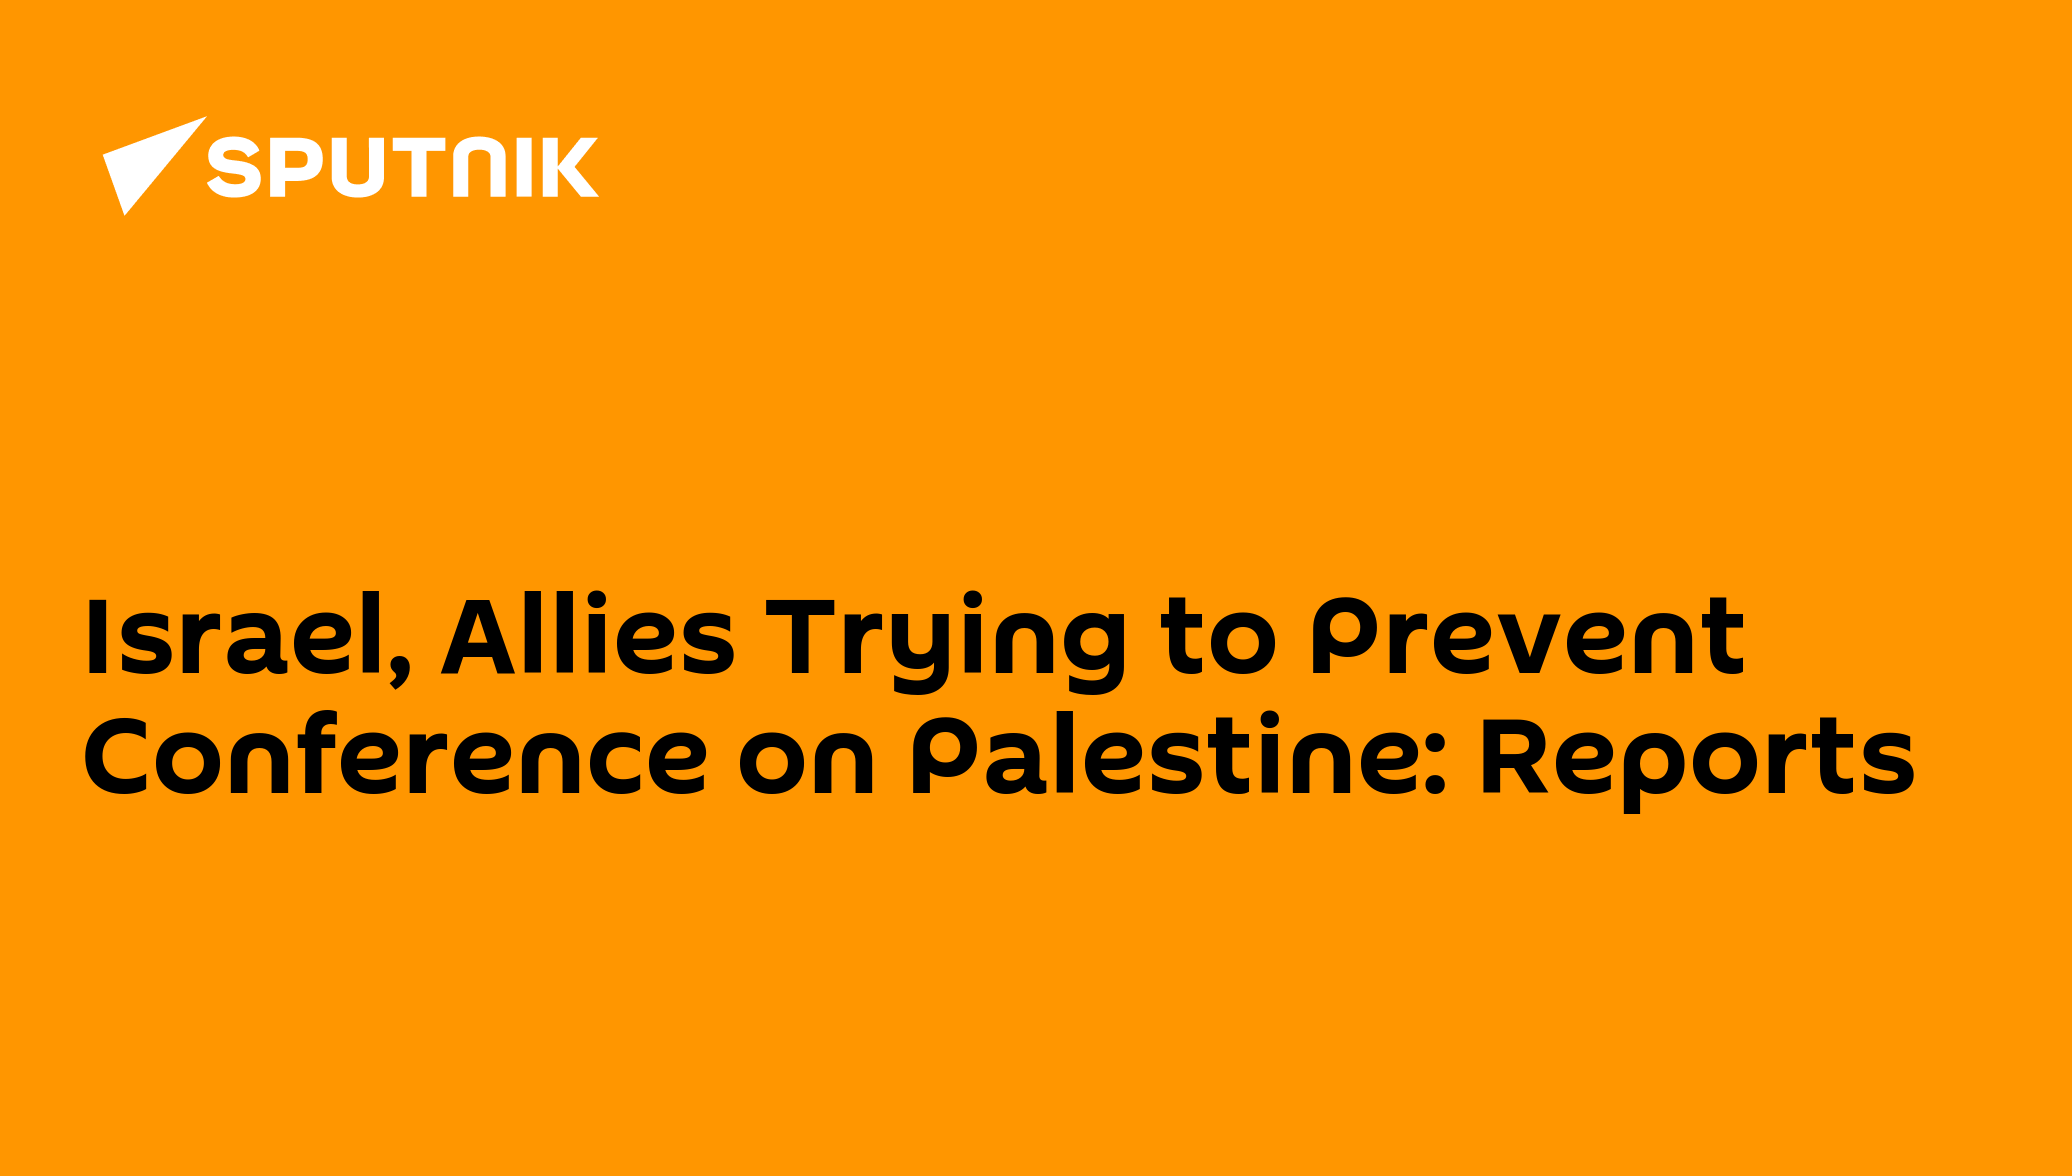 Israel, Allies Trying to Prevent Conference on Palestine Reports 27.